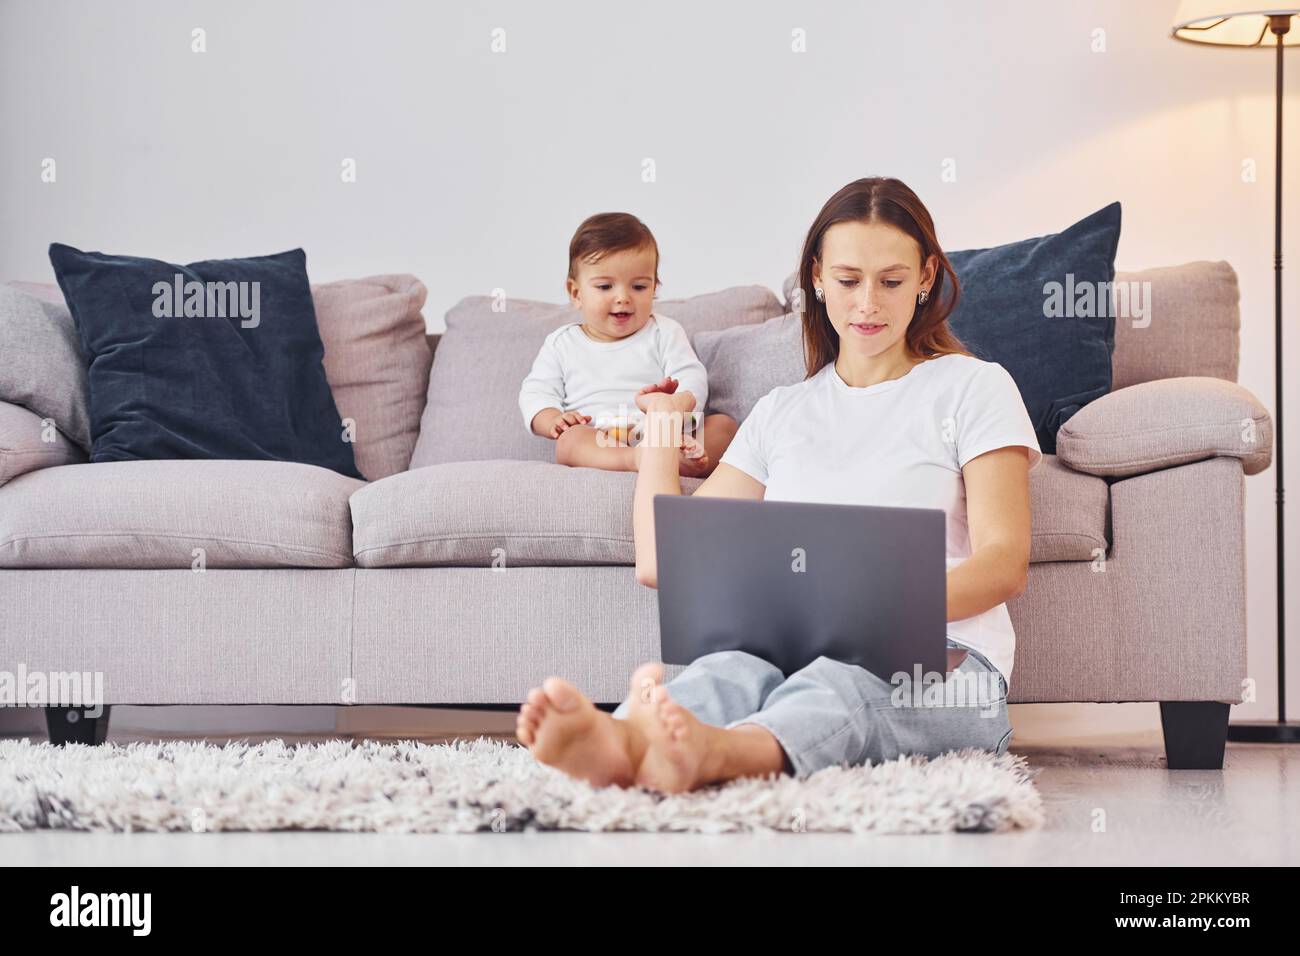 Woman working by using laptop. Mother with her little daughter is indoors at home together. Stock Photo